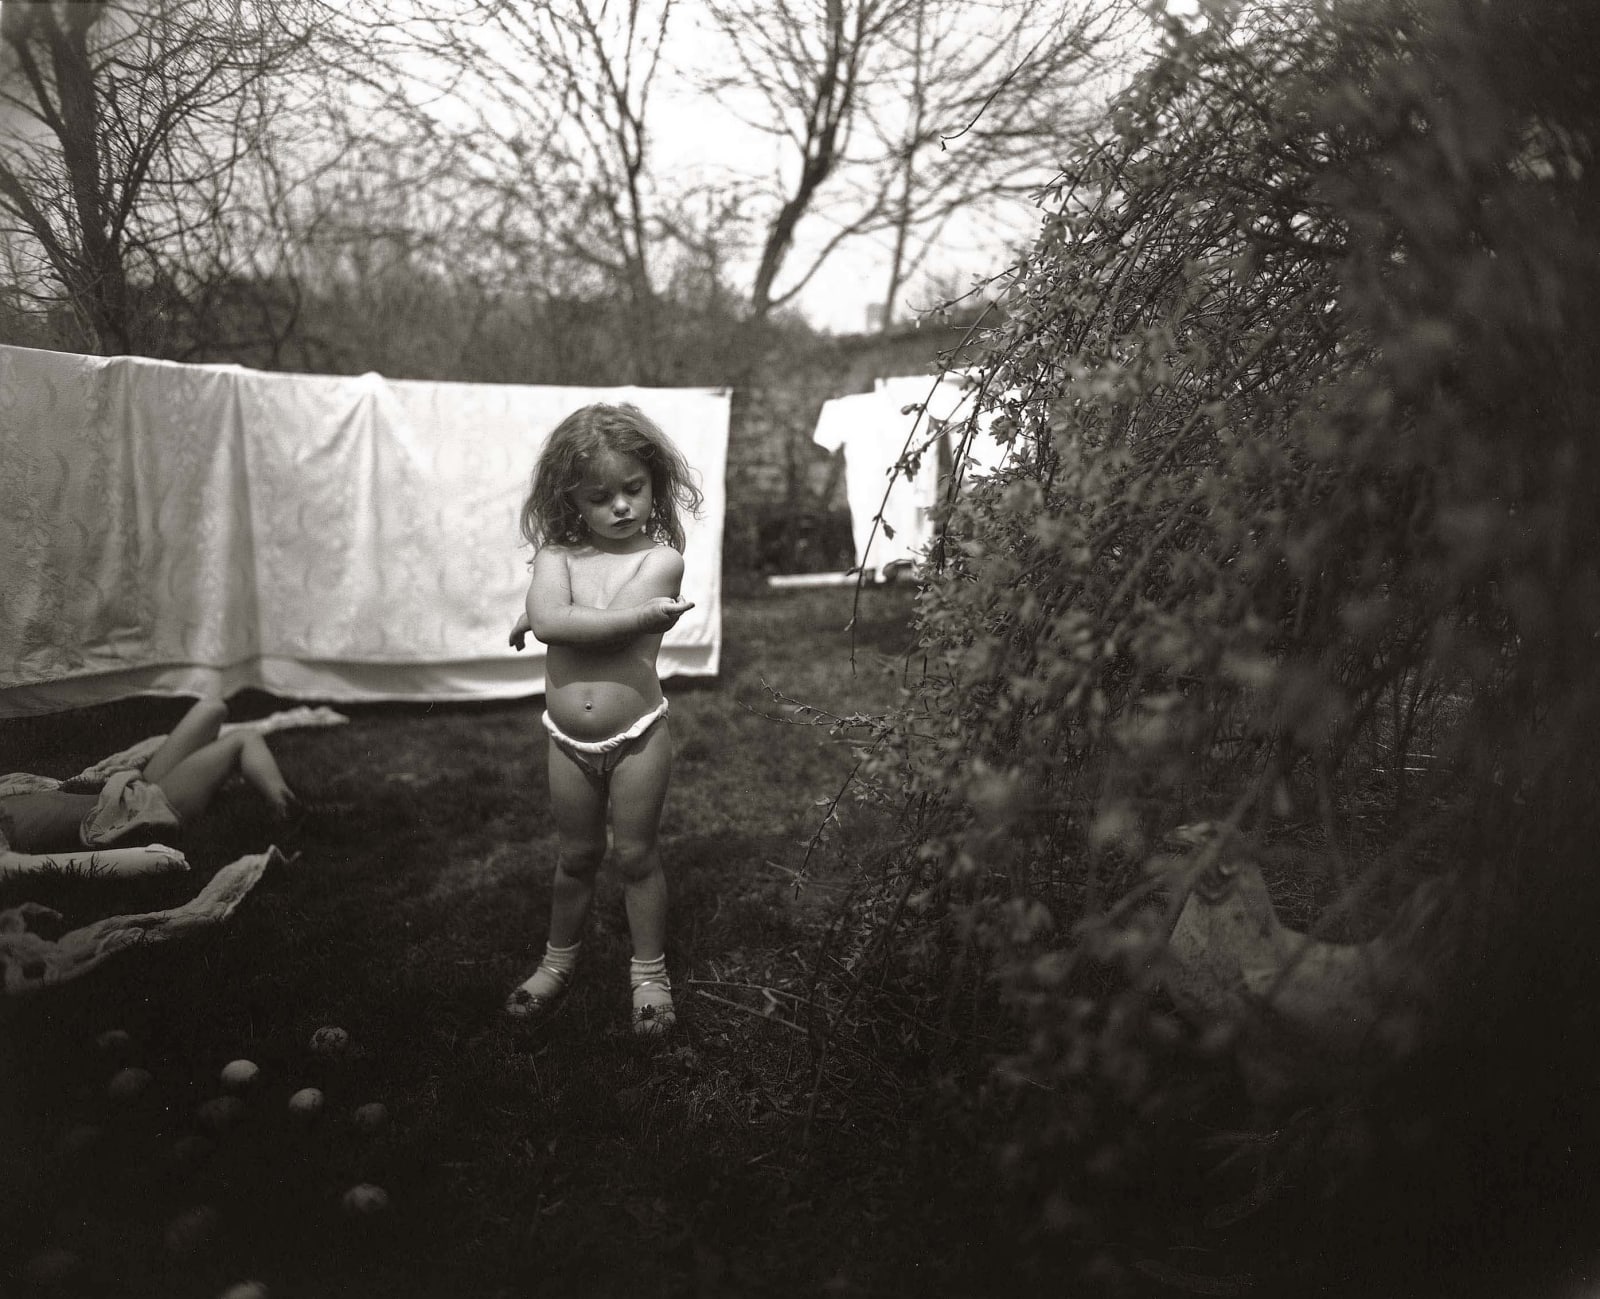 Virginia standing in front of laundry line examining hangnail, from the Immediate Family series, by Sally Mann